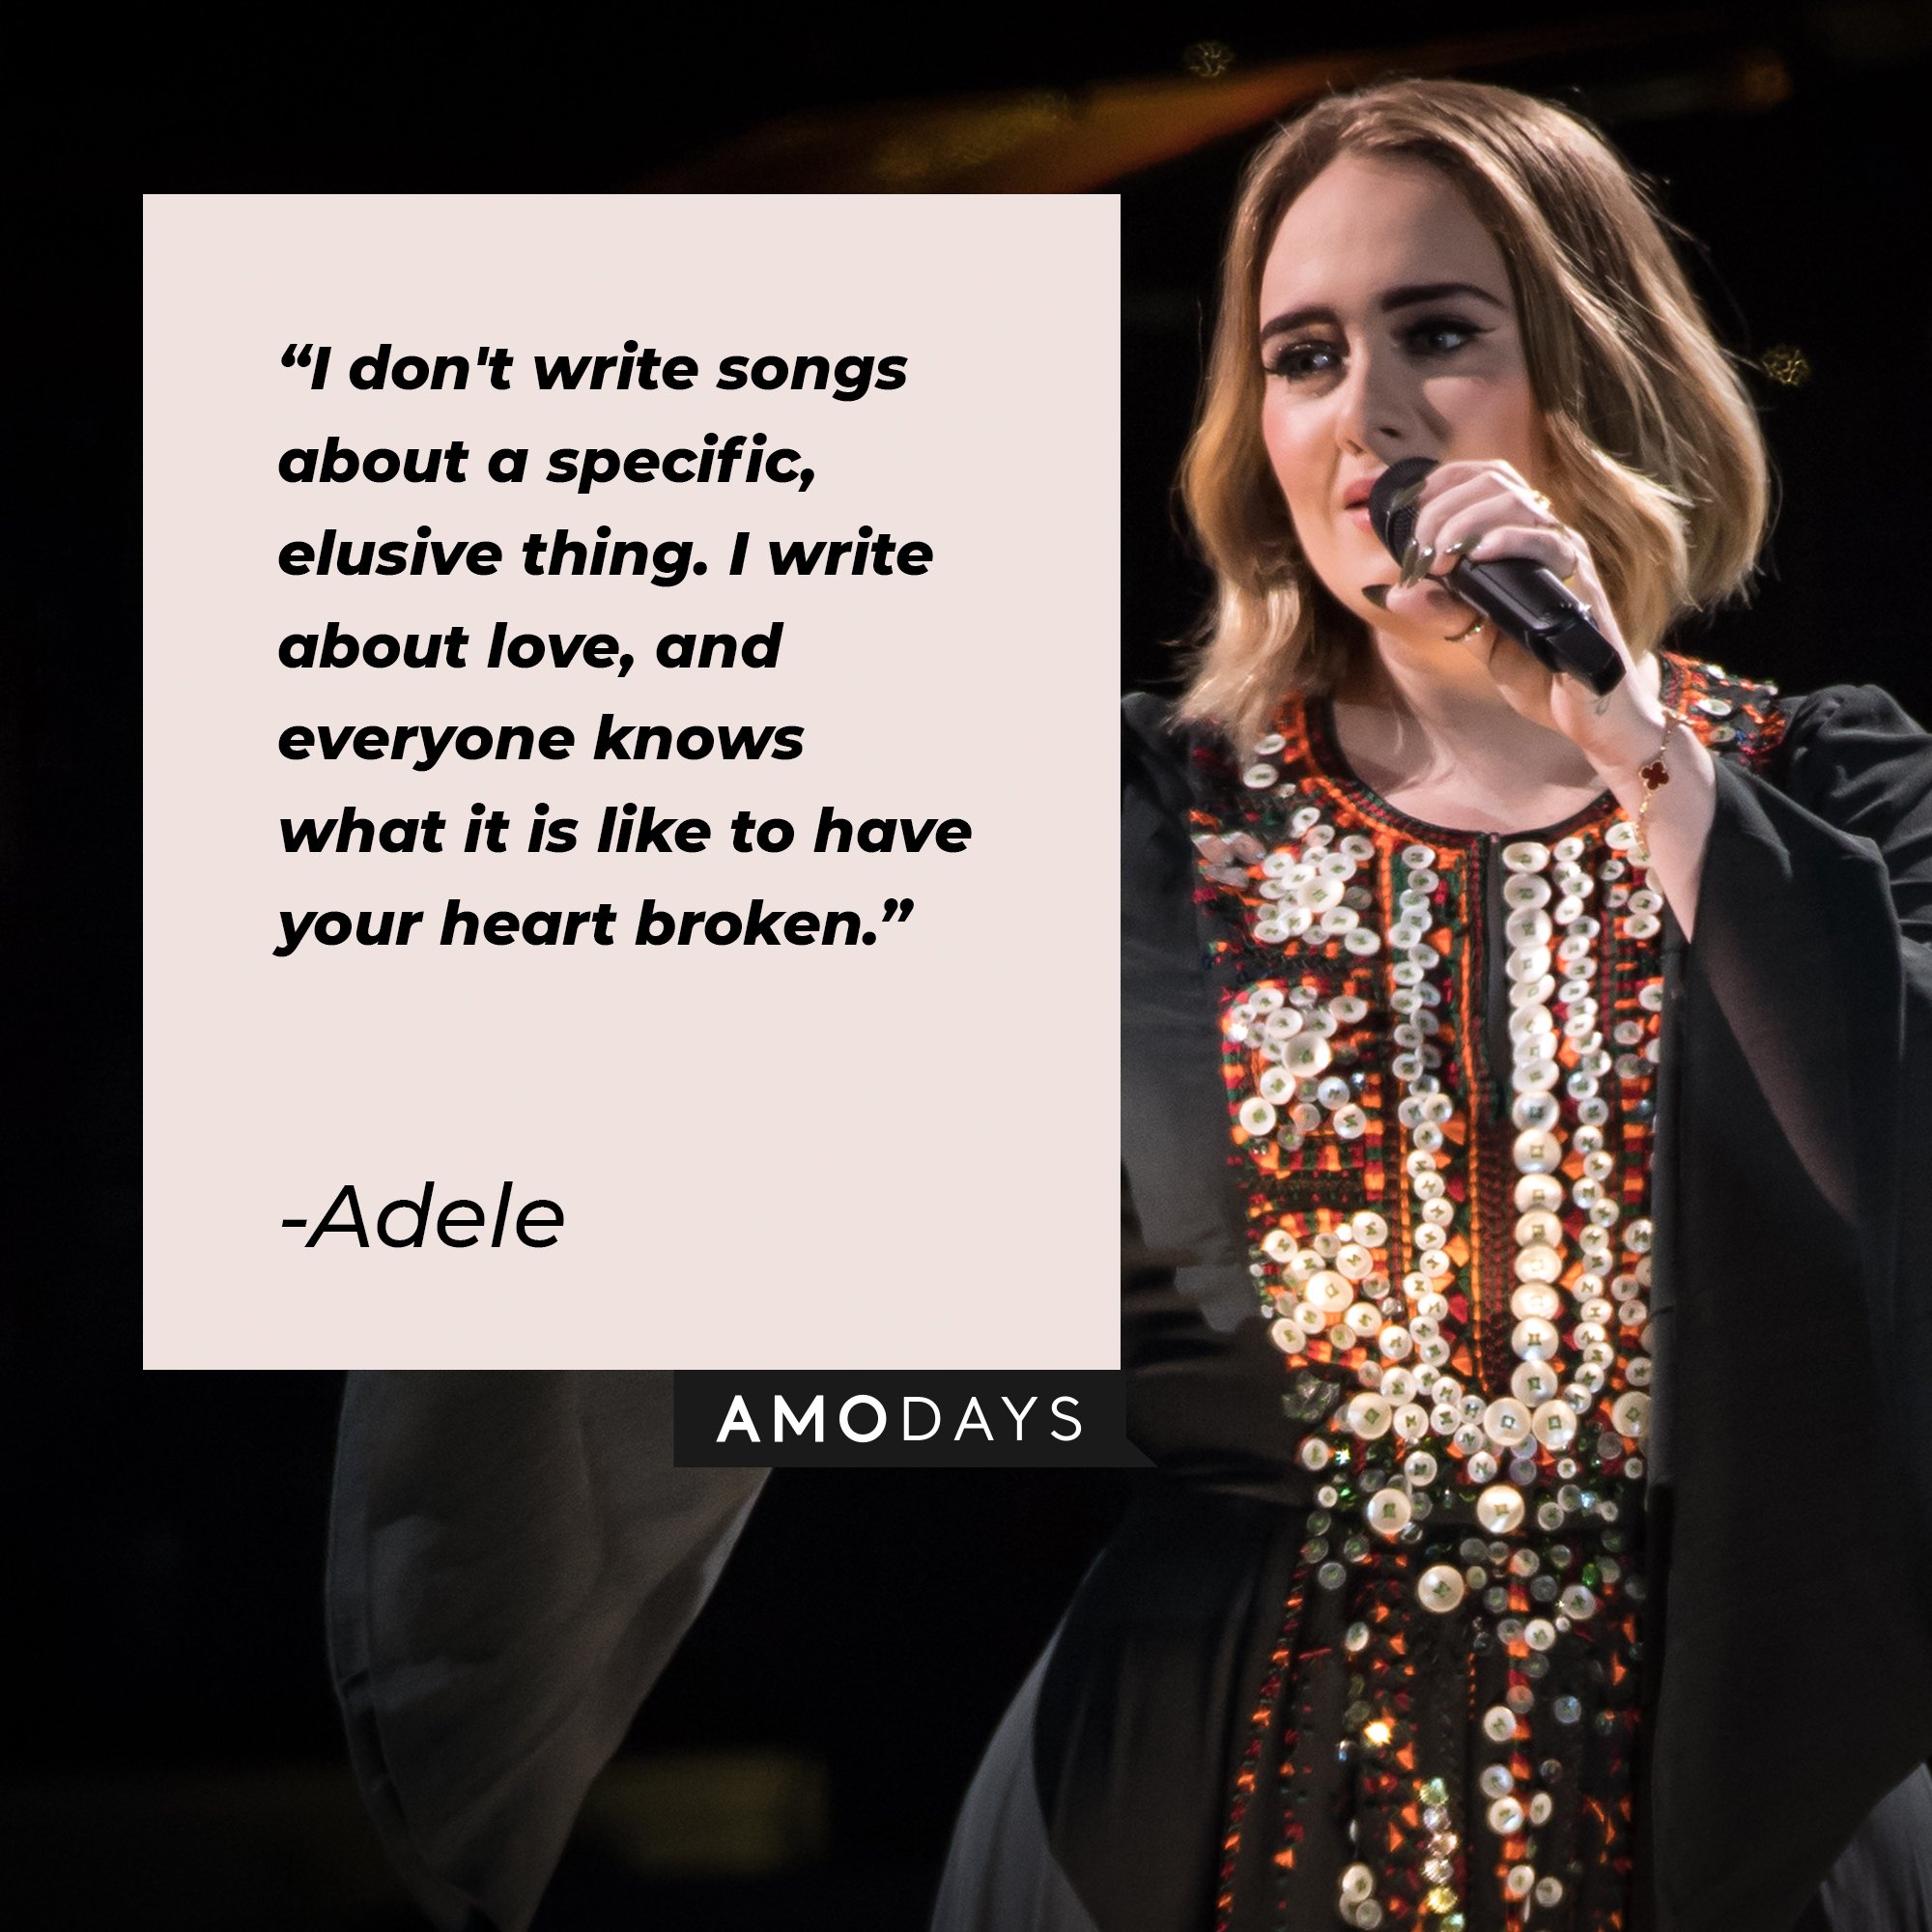 Adele’s quote: "I don't write songs about a specific, elusive thing. I write about love, and everyone knows what it is like to have your heart broken." | Image: AmoDays